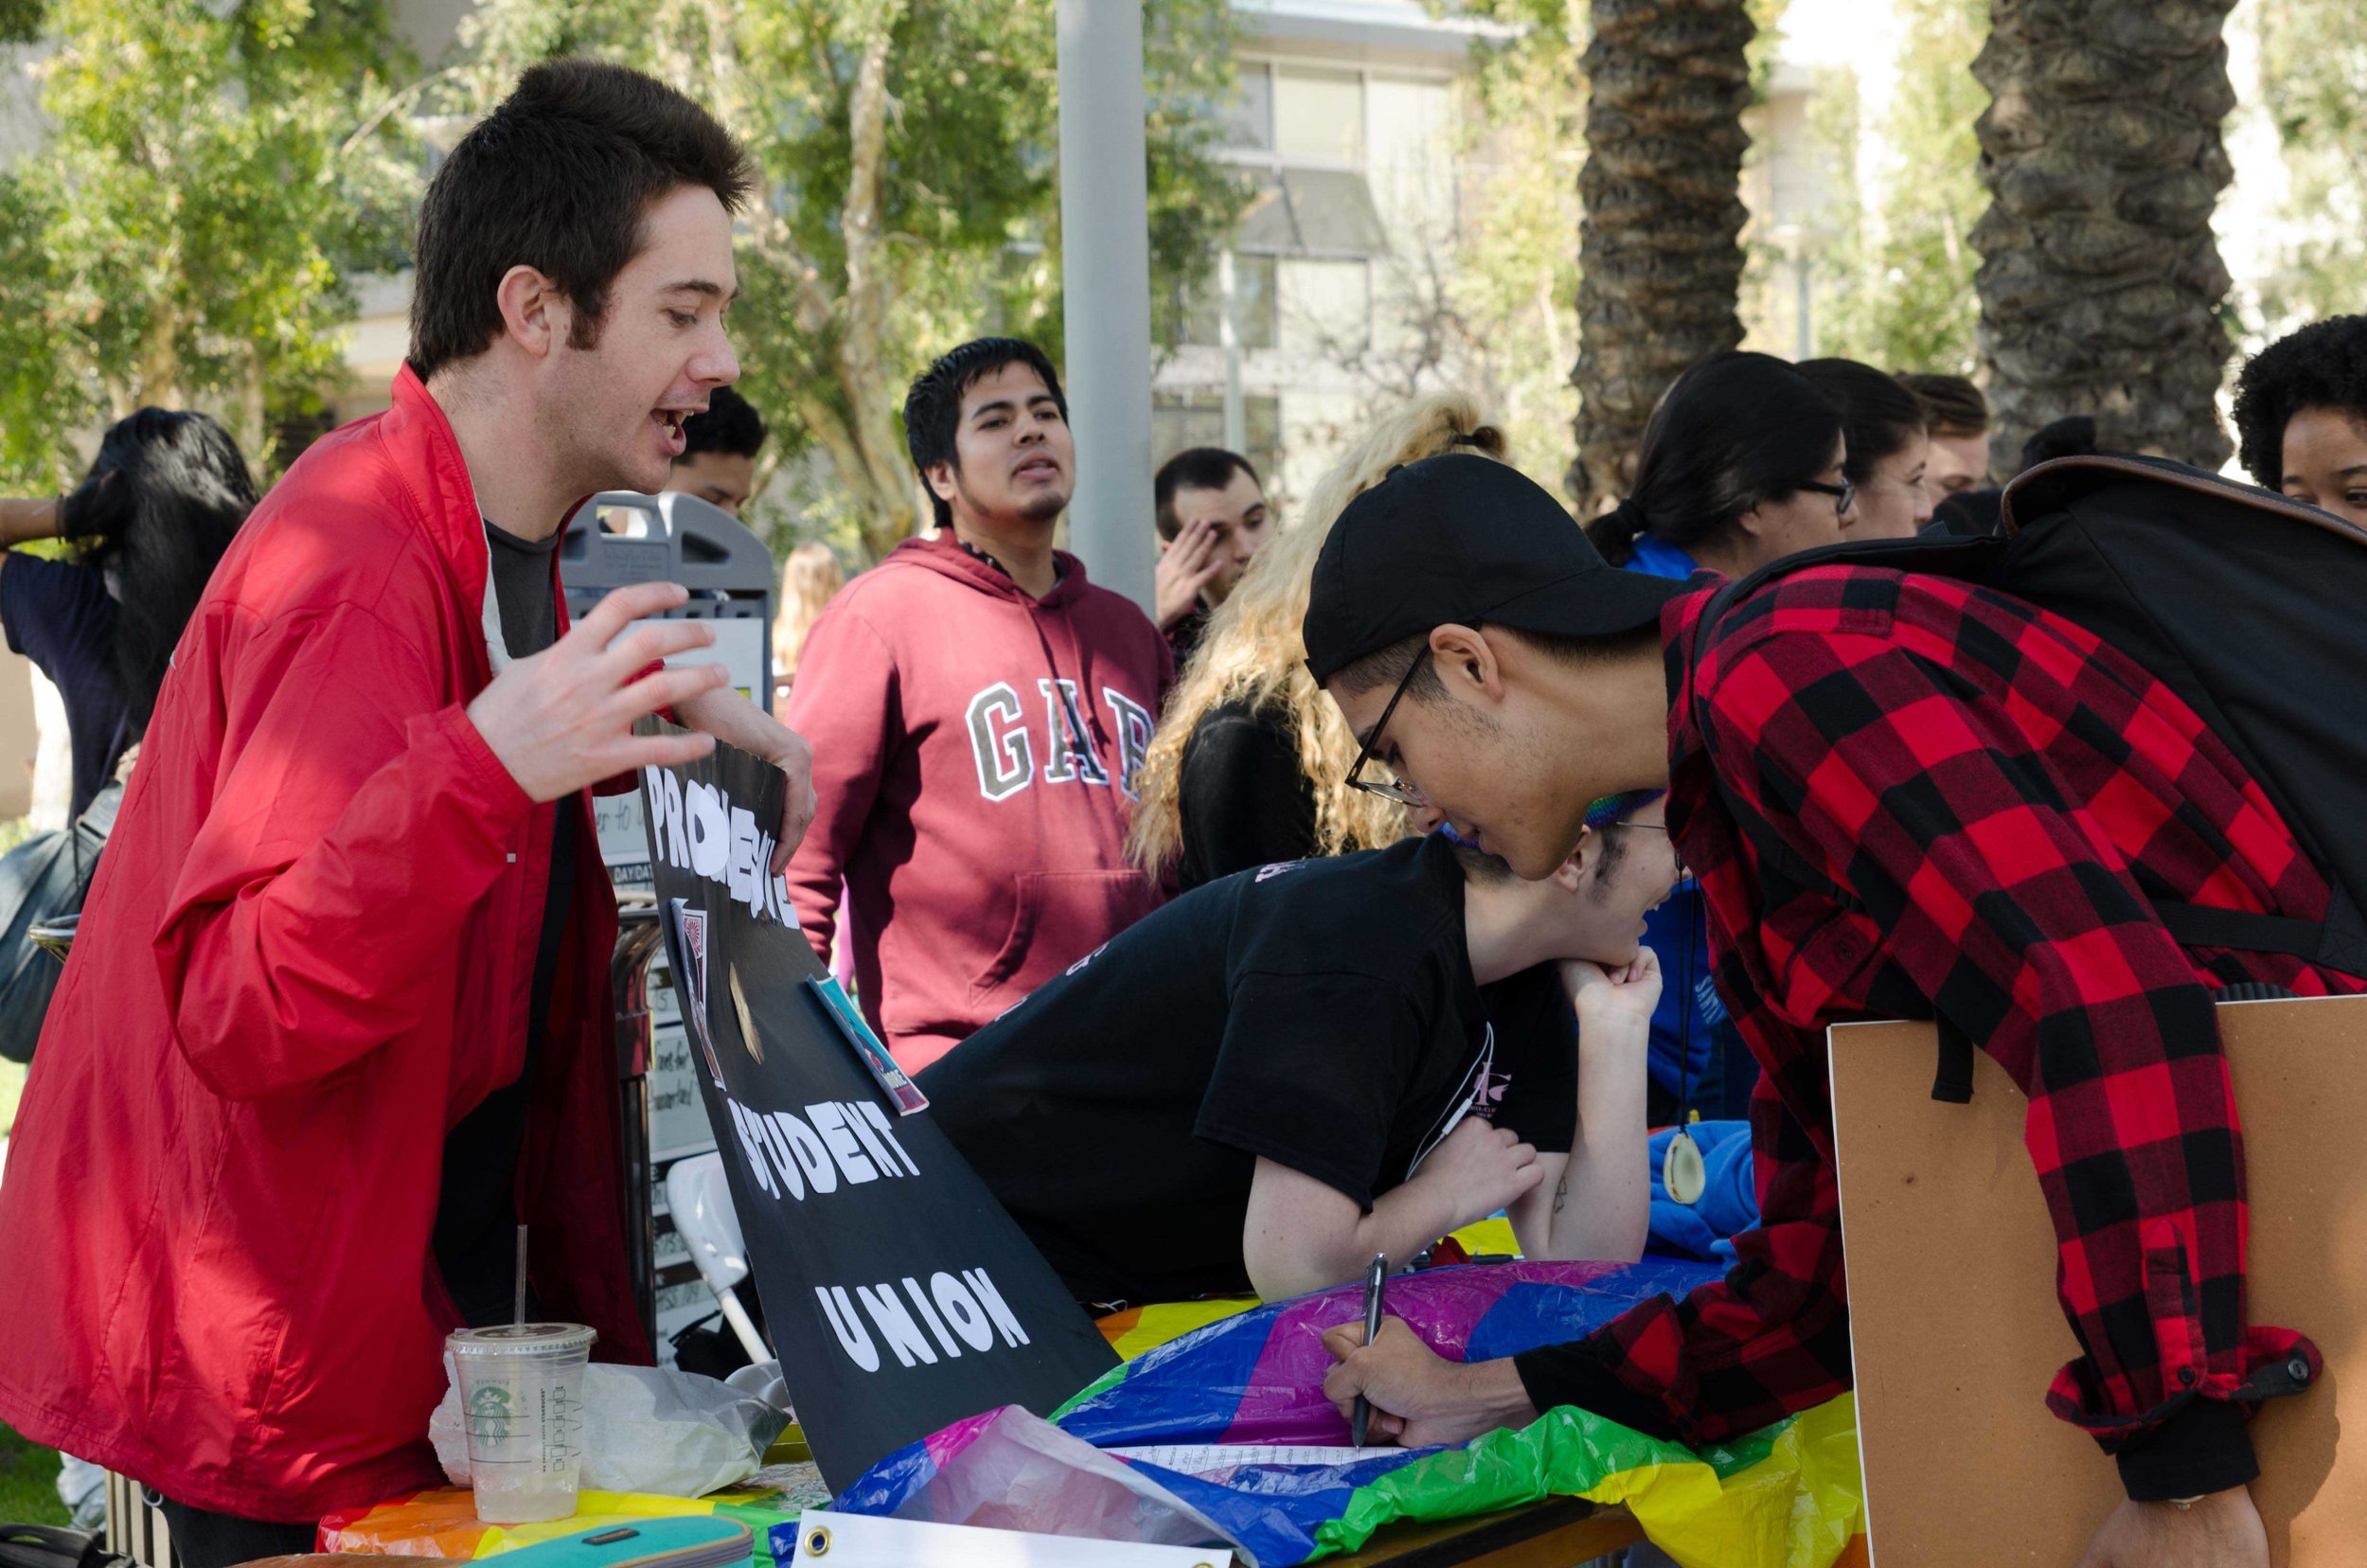  Cosmo Firmer (Leftt) recruiting Santa Monica College Students for the Progressive Student Union at Club Awareness Day at Santa Monica College in Santa Monica, California on March 14, 2017 (Photo By: Diana Parra Garcia) 